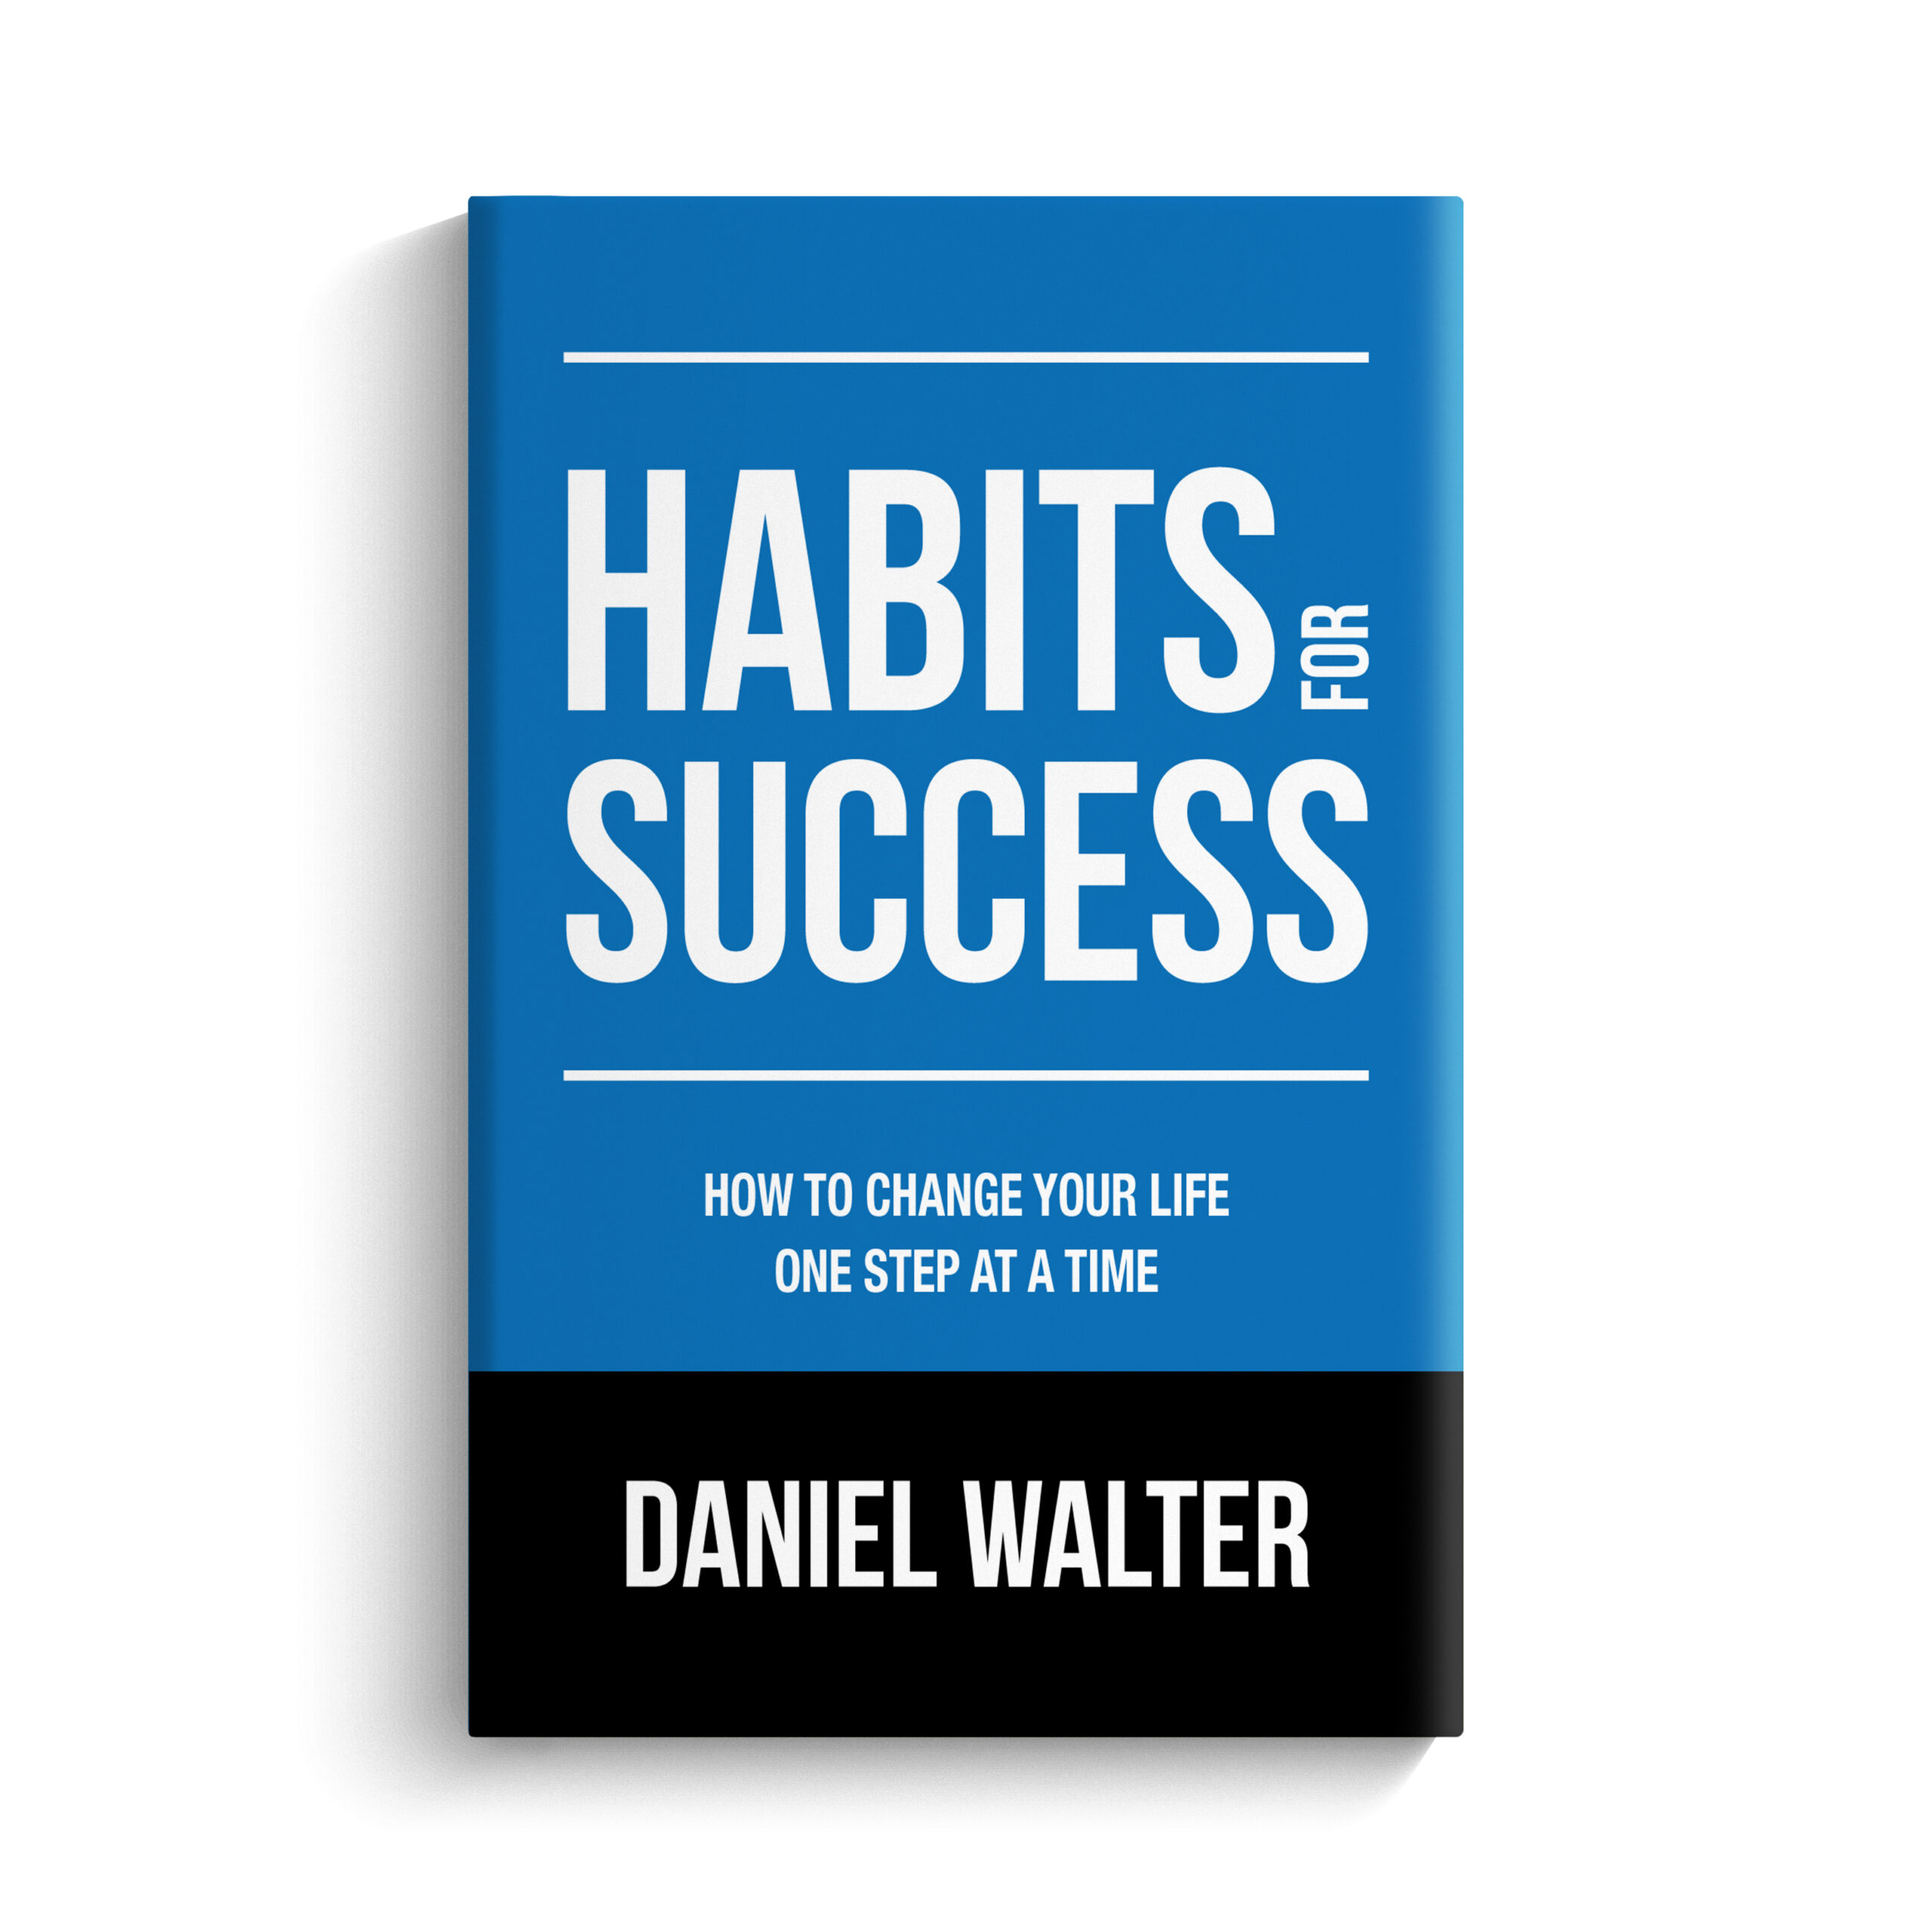 Habits for Success by Daniel Walter